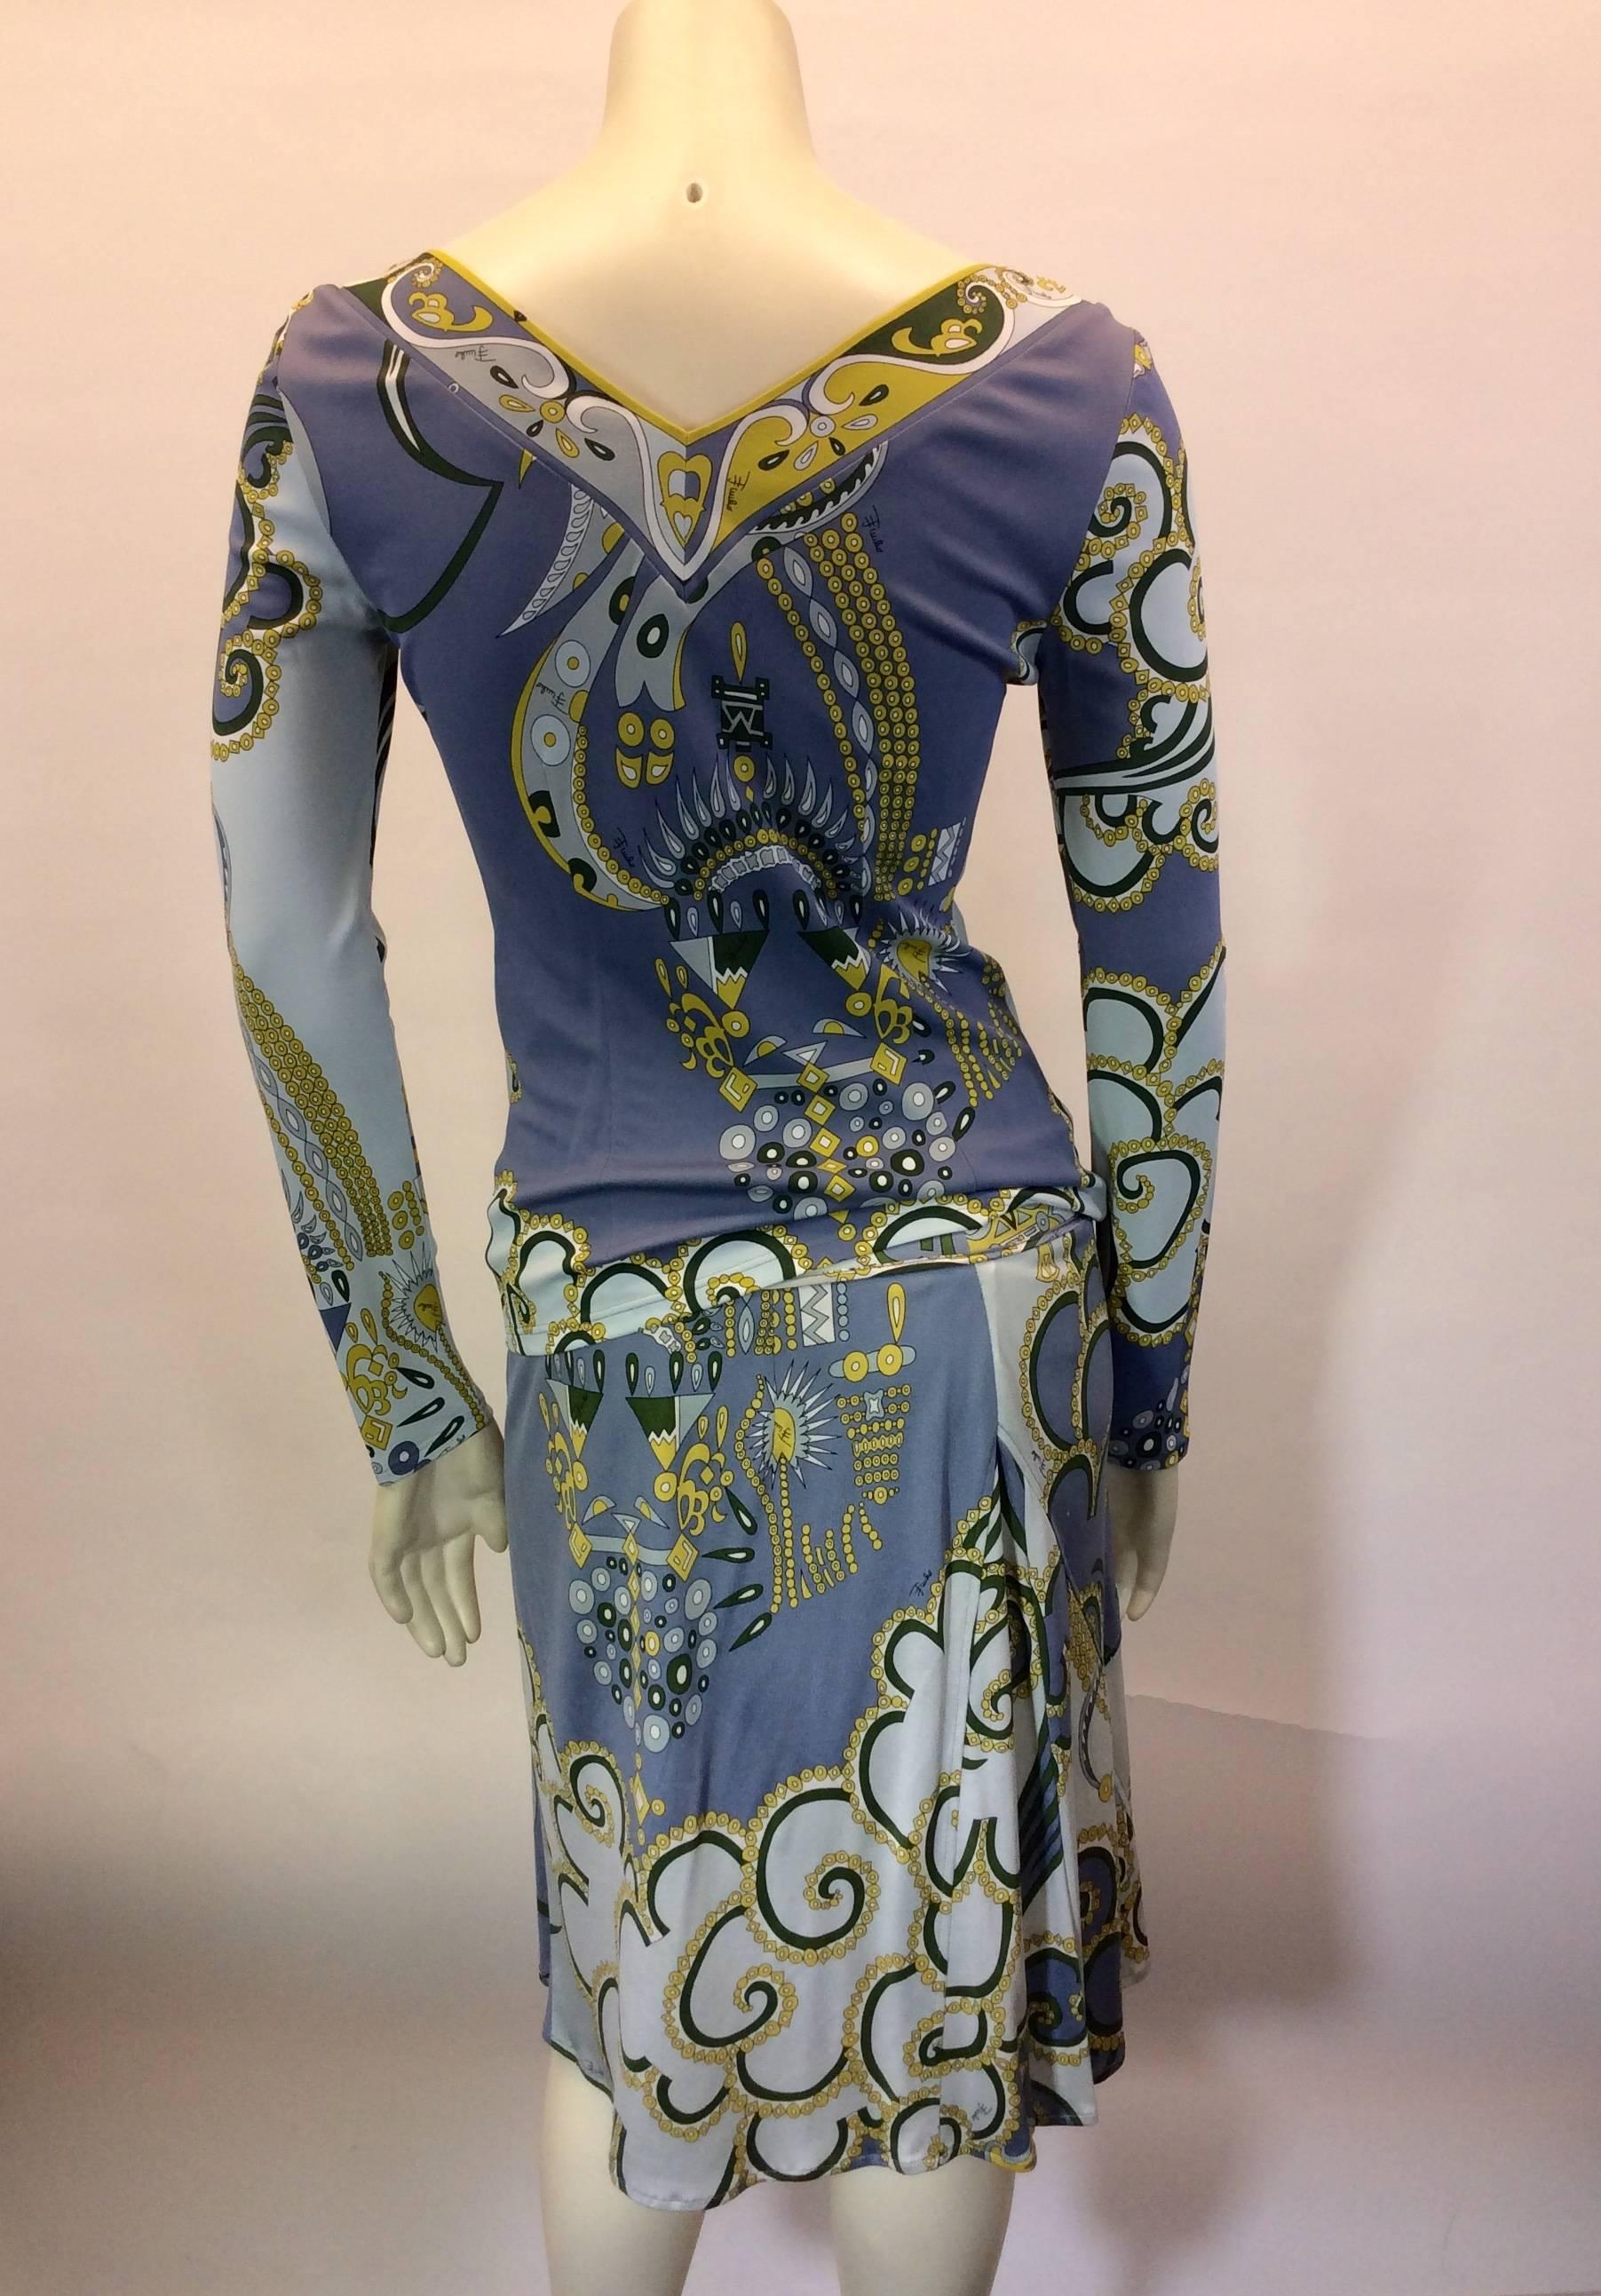 Emilio Pucci Beautiful Two Piece Graphic Print Blouse and Matching Skirt Set In Excellent Condition For Sale In Narberth, PA